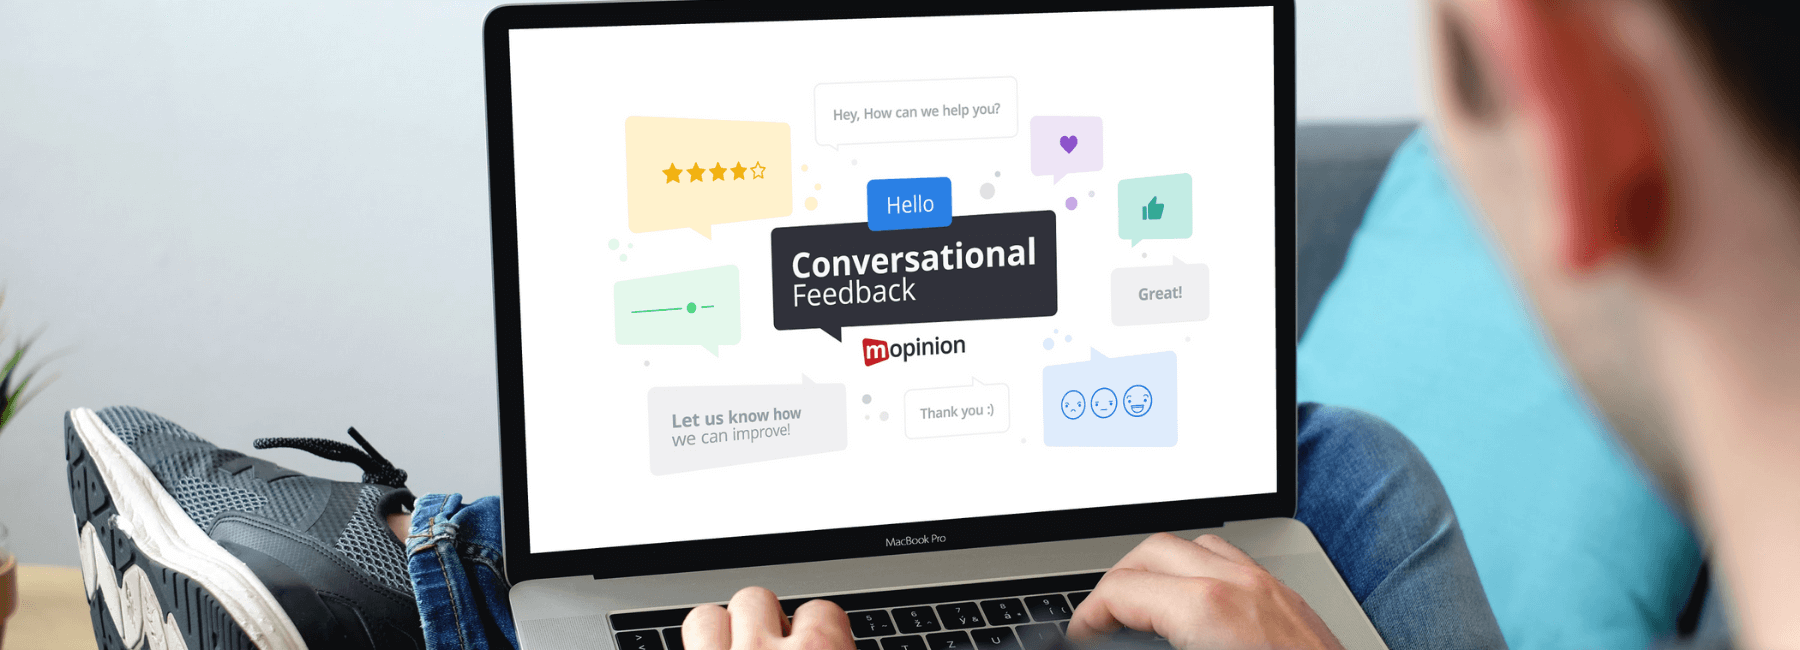 Say Hello to Conversational Feedback – it’s live!